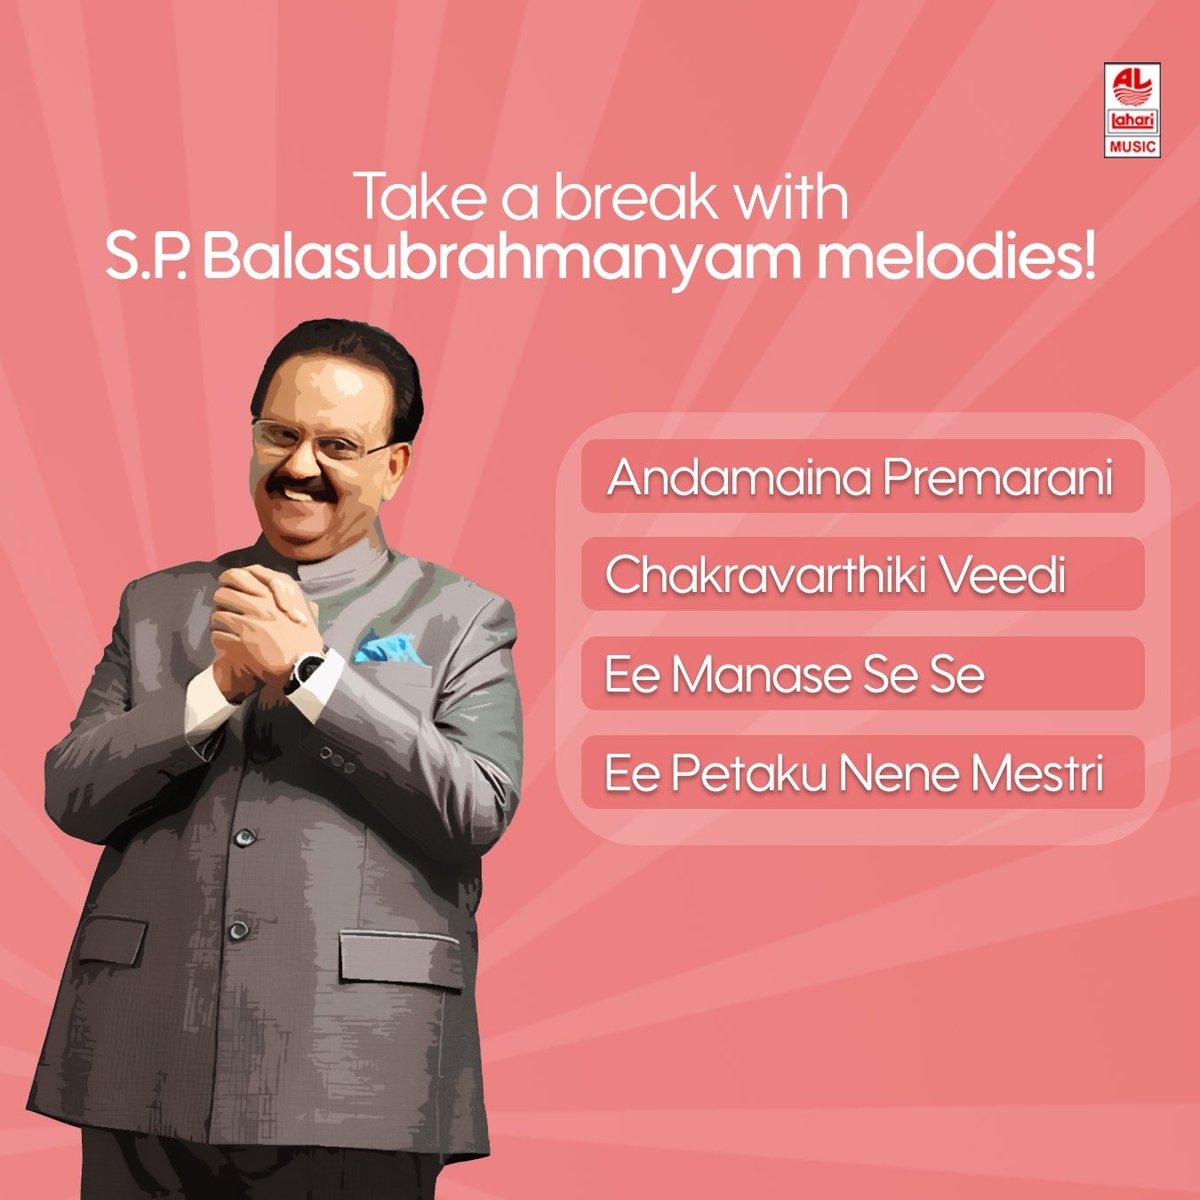 Research has said that SPB's songs help optimise mood. And by research we mean, personal experience💫🌟

#LahariMusic #SPBalasubrahmanyam